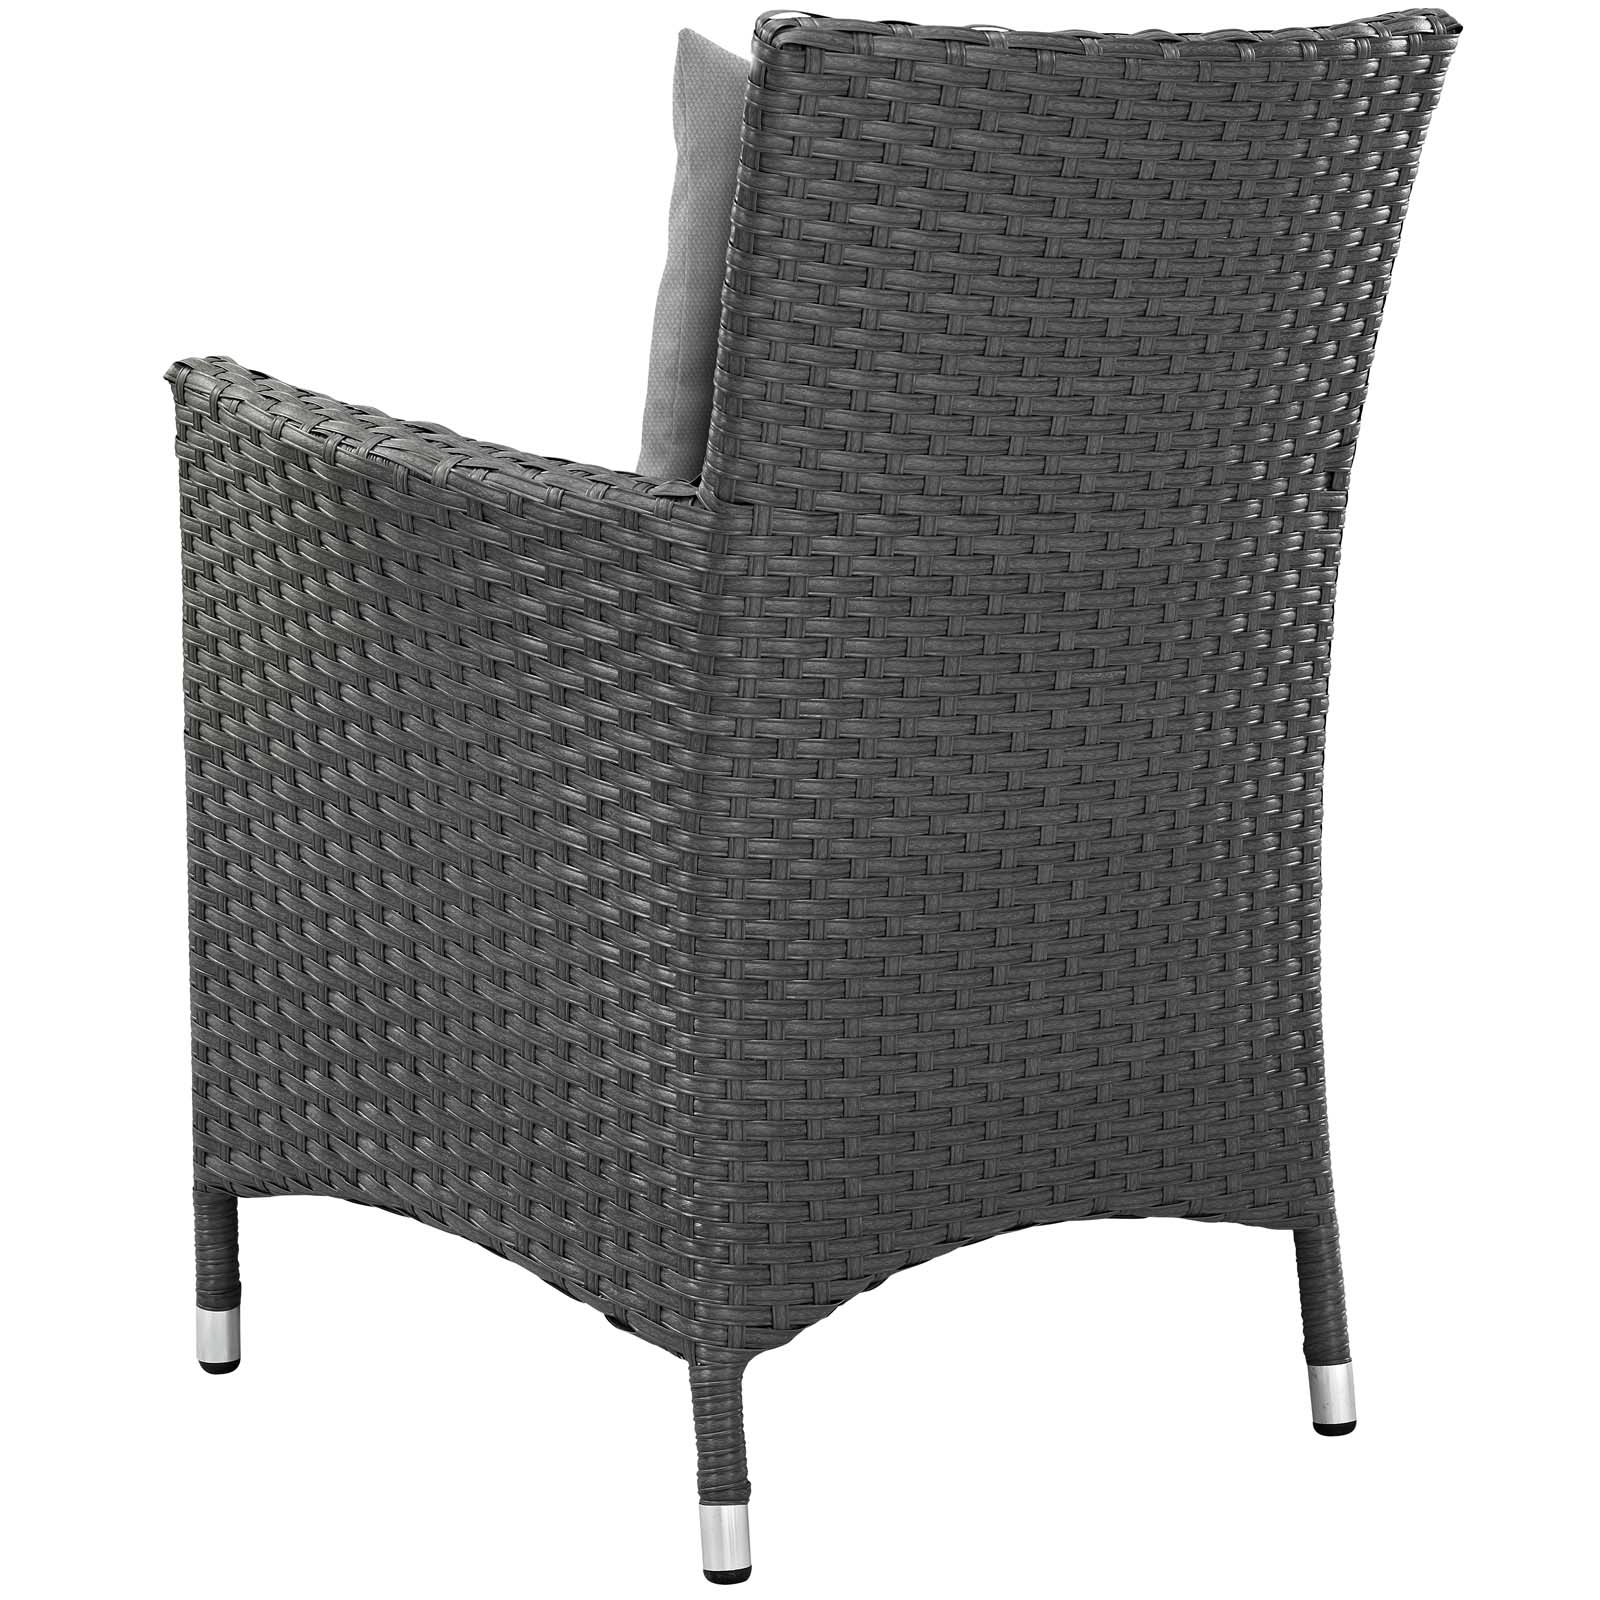 Modern Contemporary Urban Outdoor Patio Balcony Garden Furniture Side Dining Chair and Table Set, Sunbrella Rattan Wicker, Grey Gray - image 5 of 6